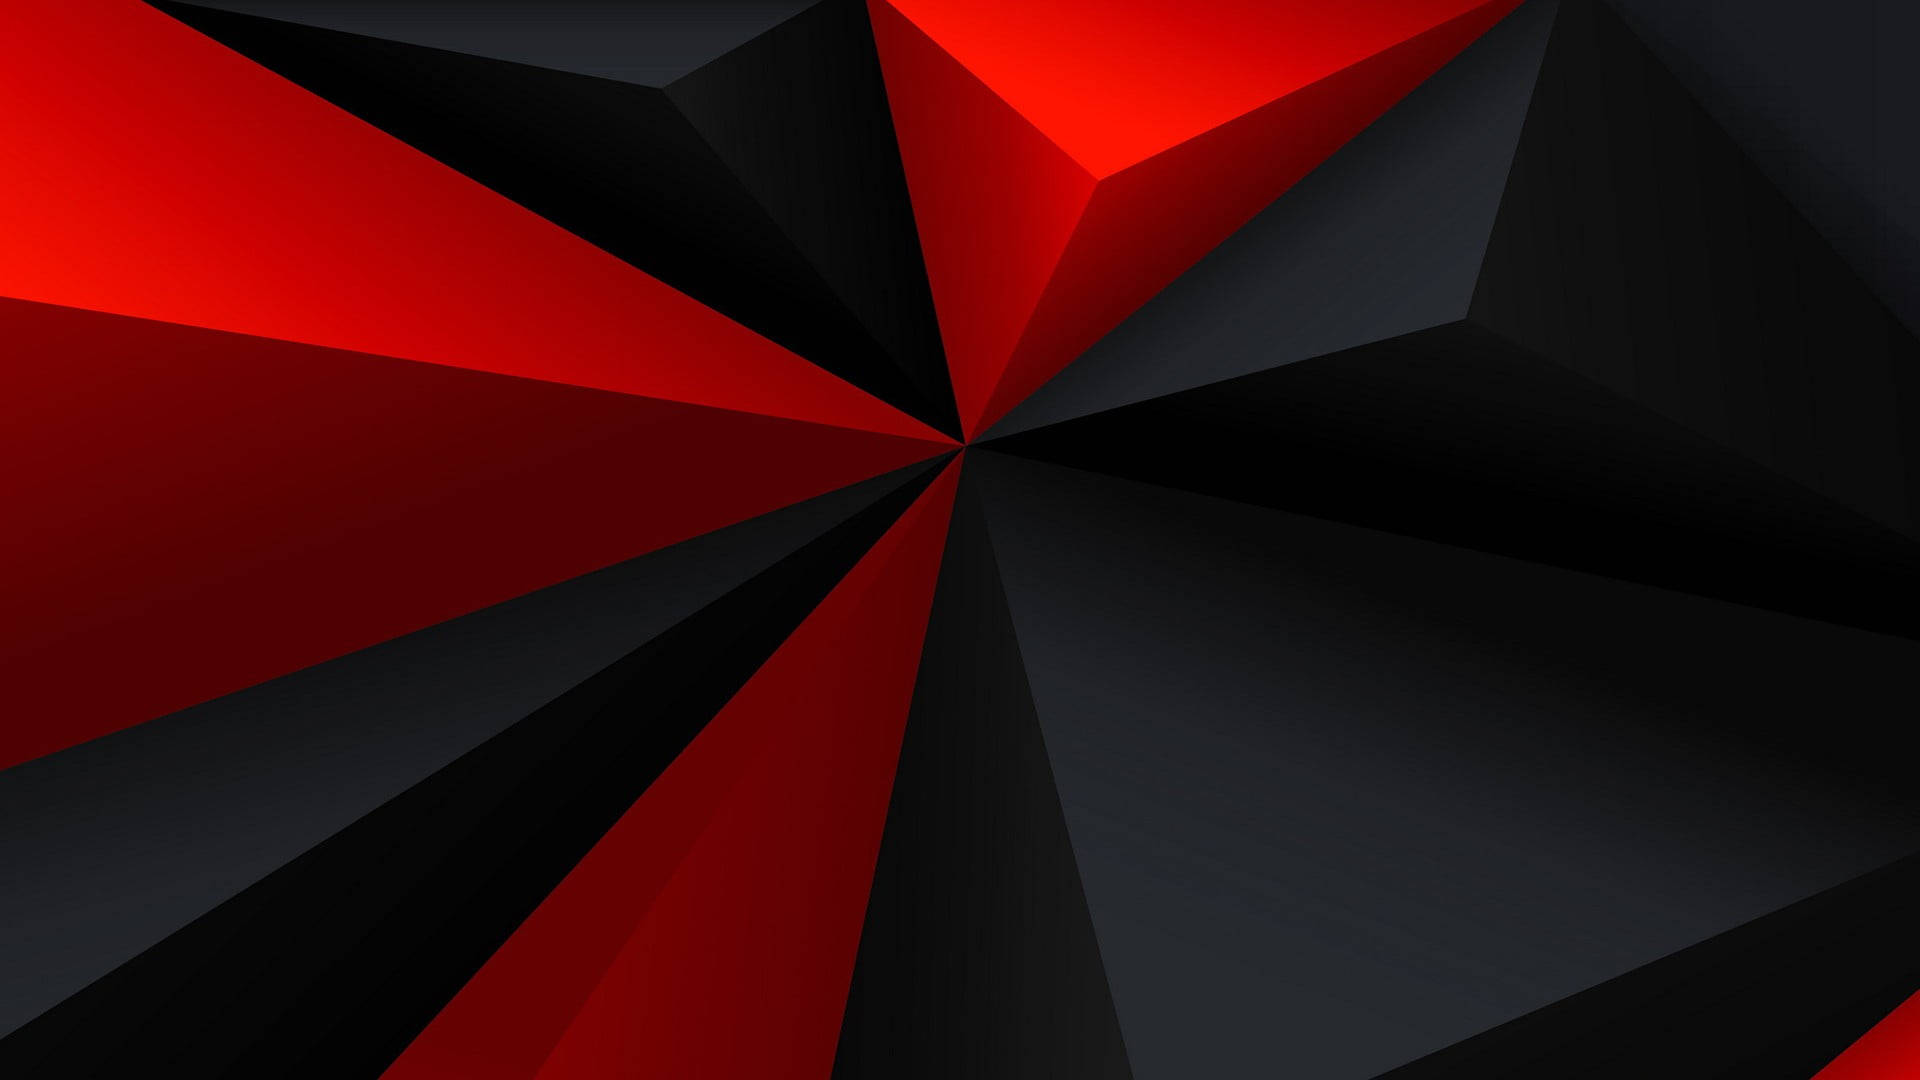 Geometrickblack And Red Abstract Artwork Wallpaper